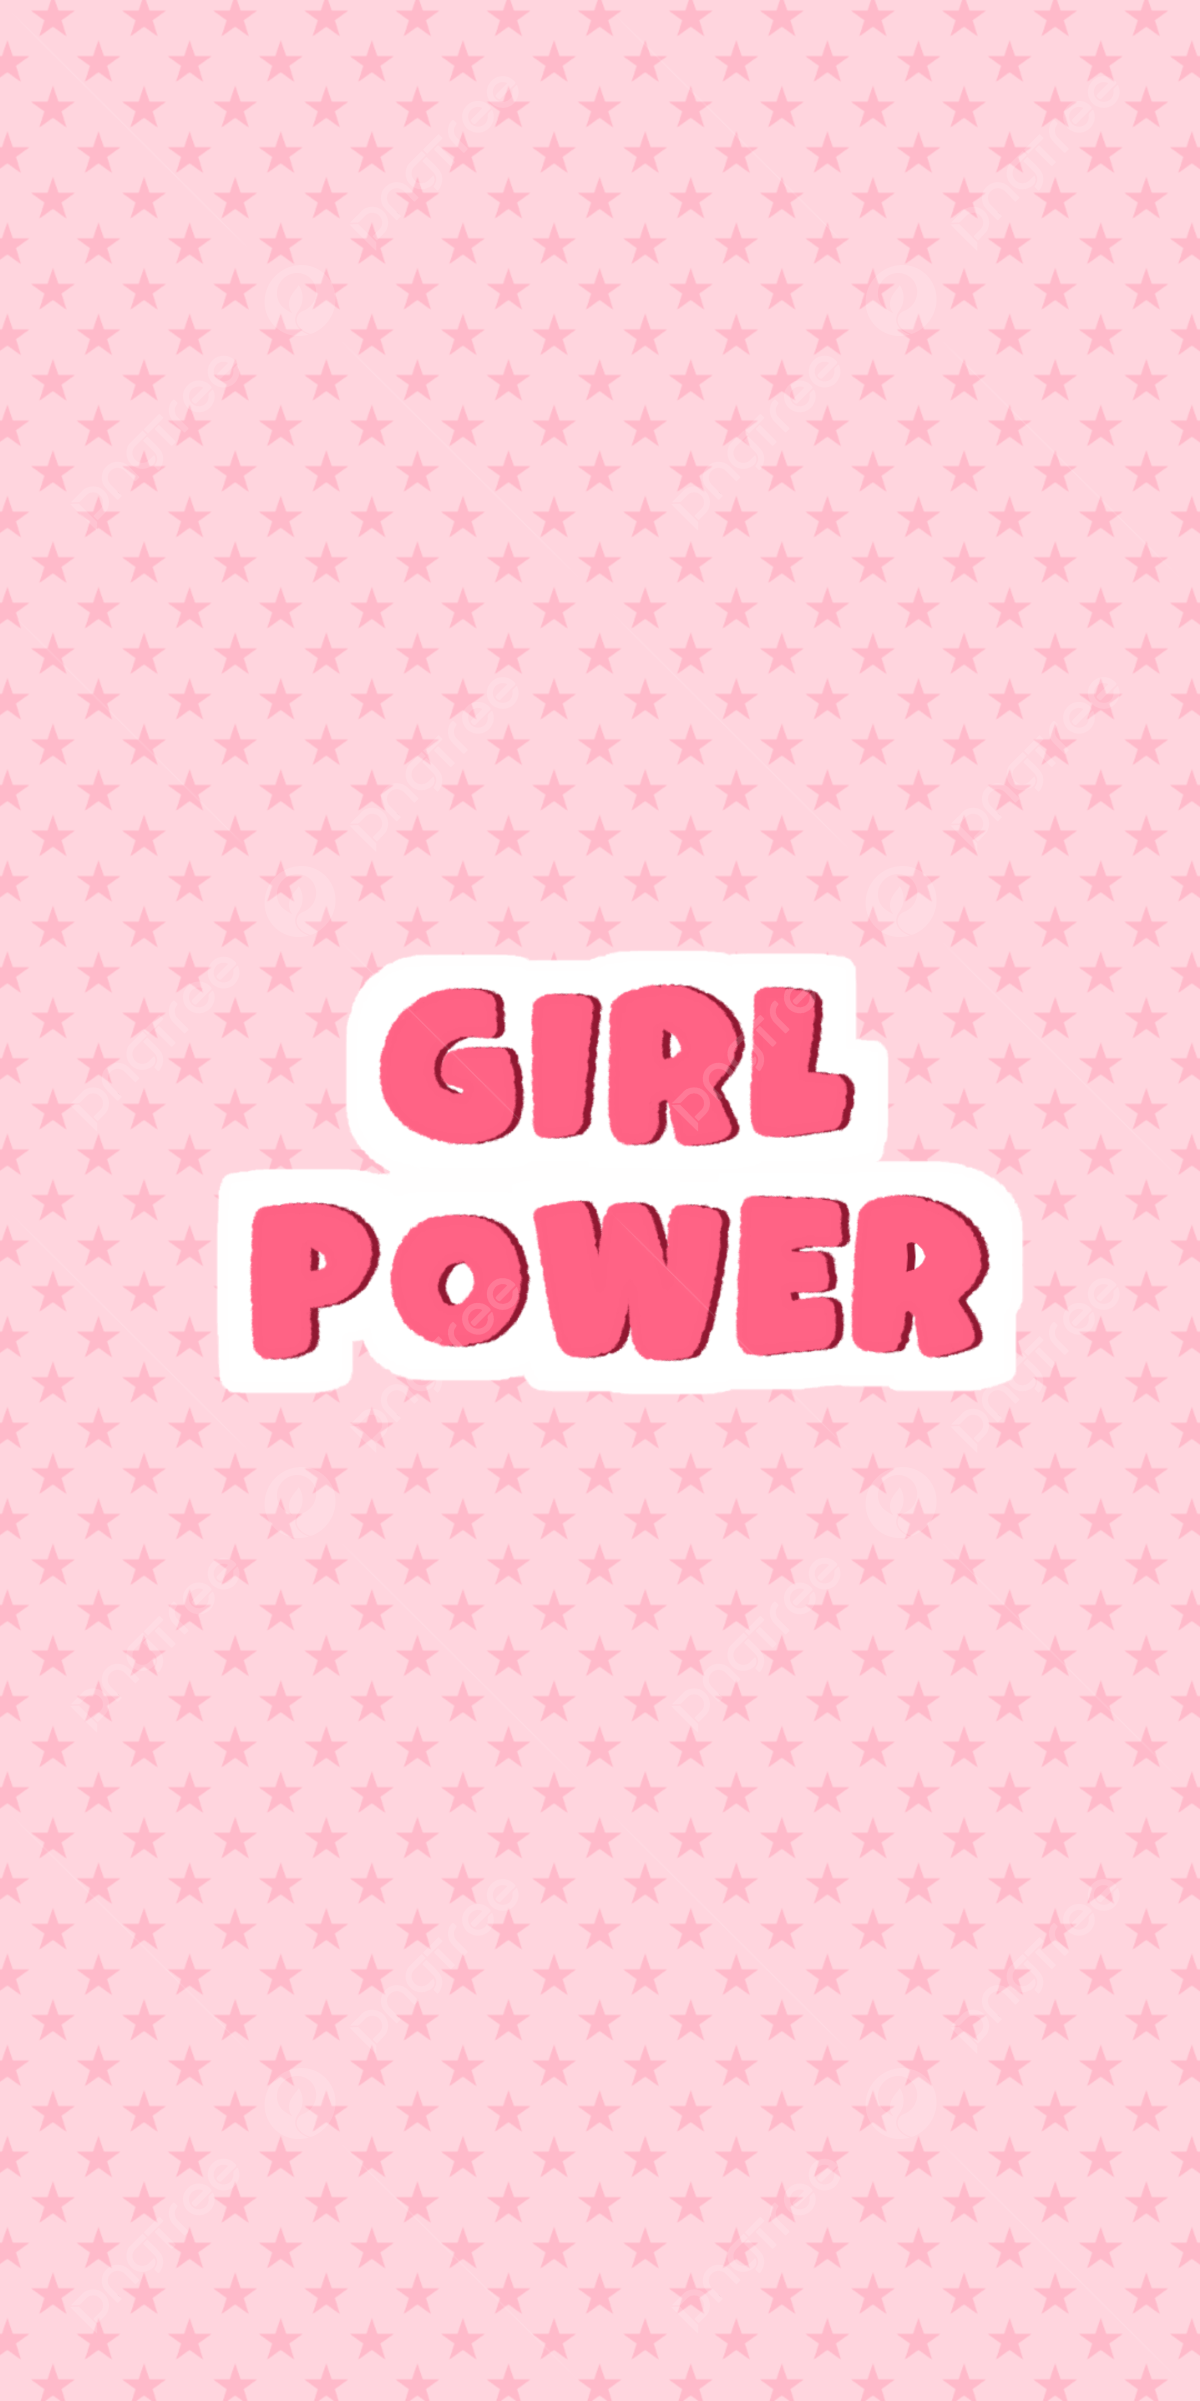 Cute Pink Wallpaper Phone Girl Power Background Wallpaper Image For Free Download